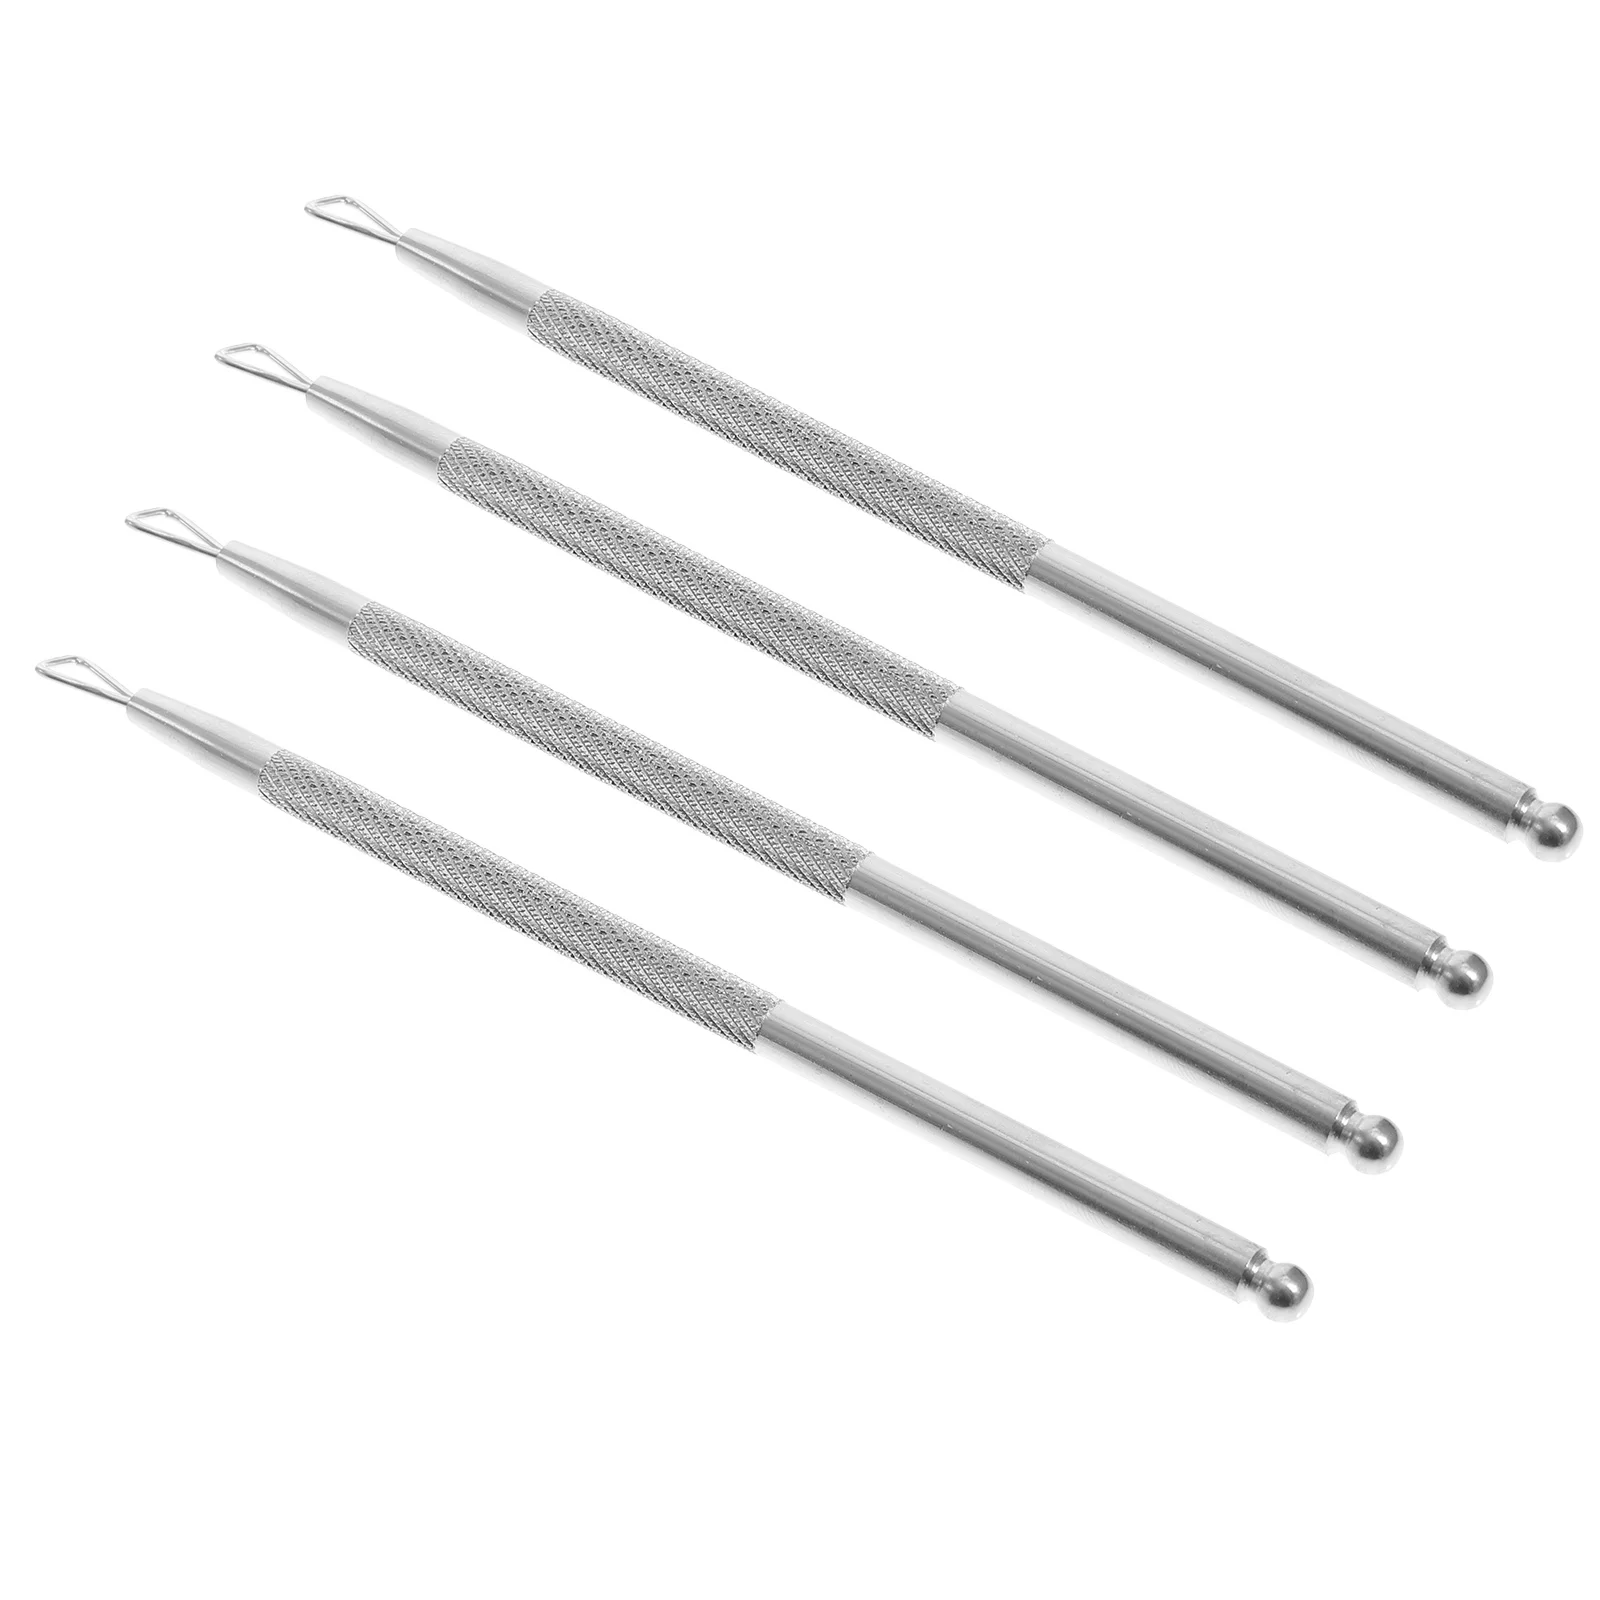 

4 Pcs Nail Scraper Trimmer Gel Stainless Steel Remover Removing Tool Pusher